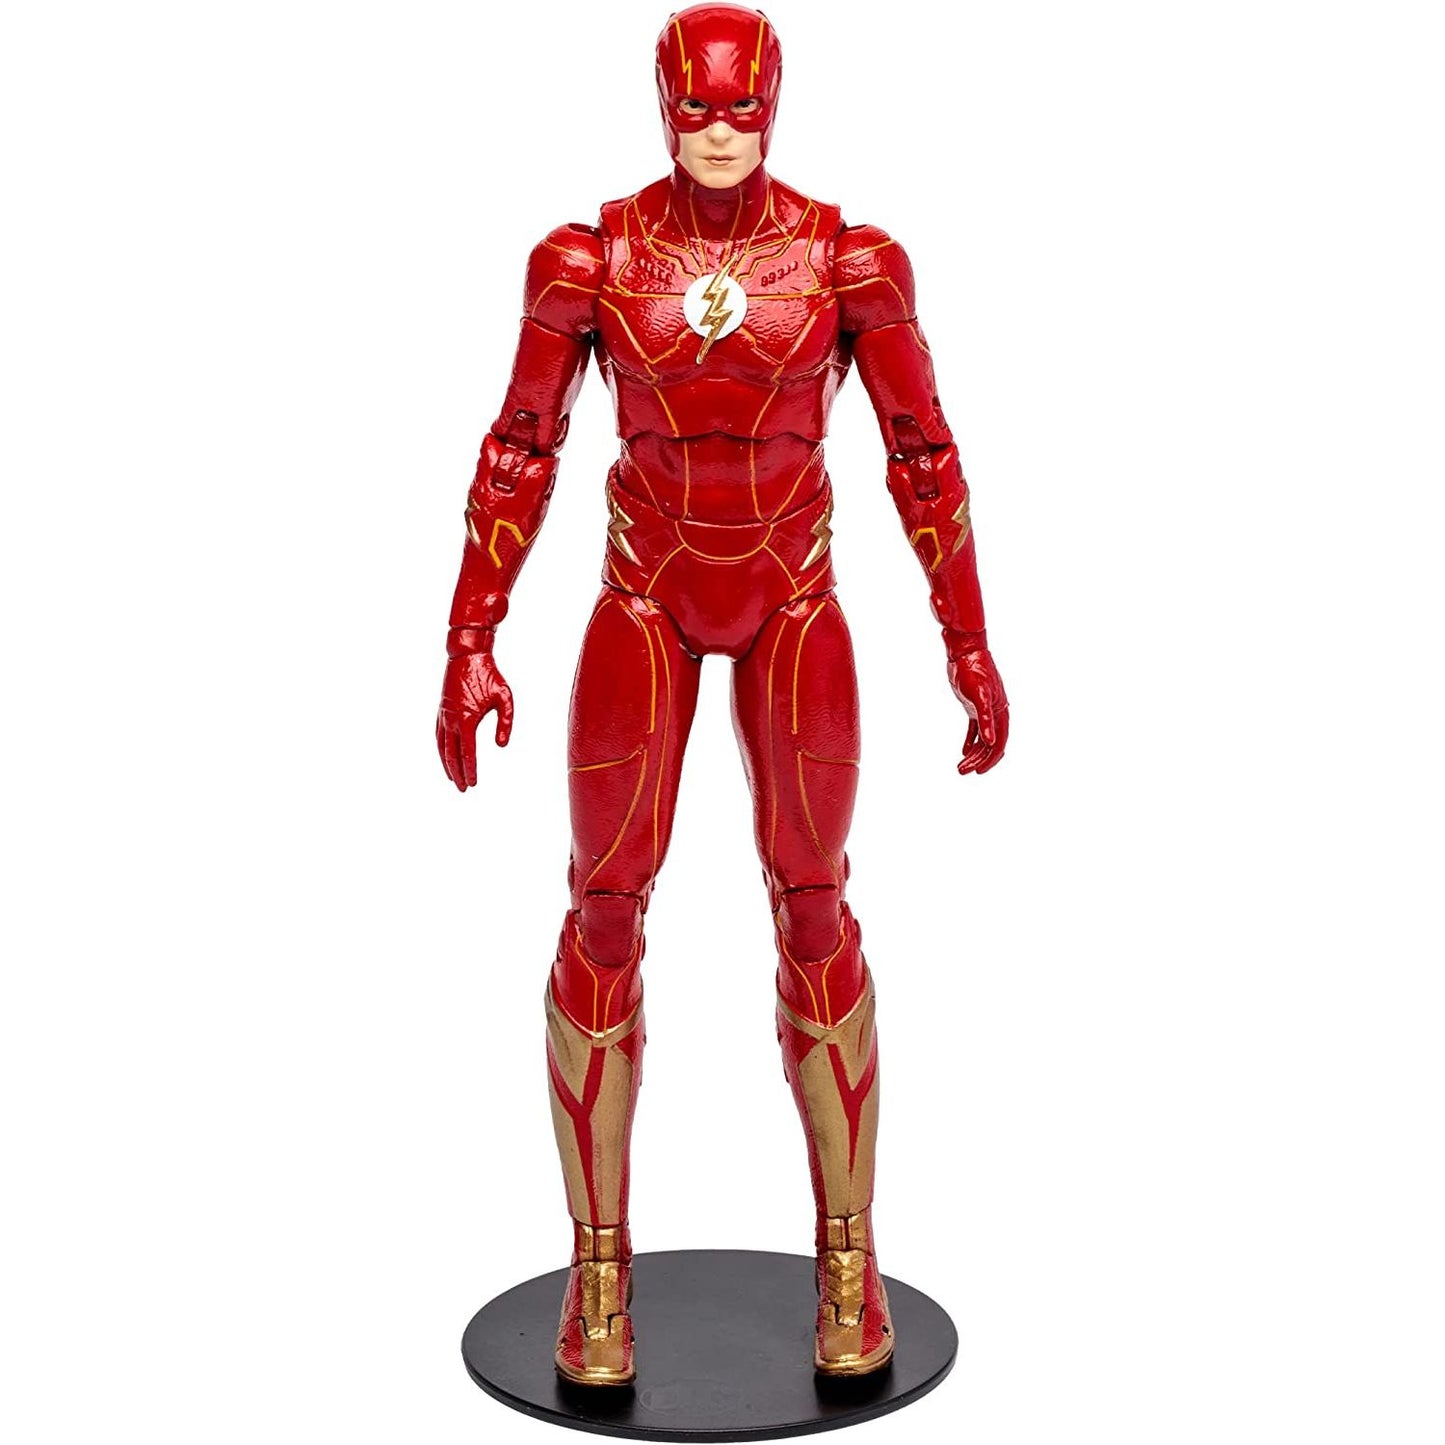 DC Multiverse - The Flash Movie - The Flash Action Figure 7INCh Toy Front Pose- Heretoserveyou